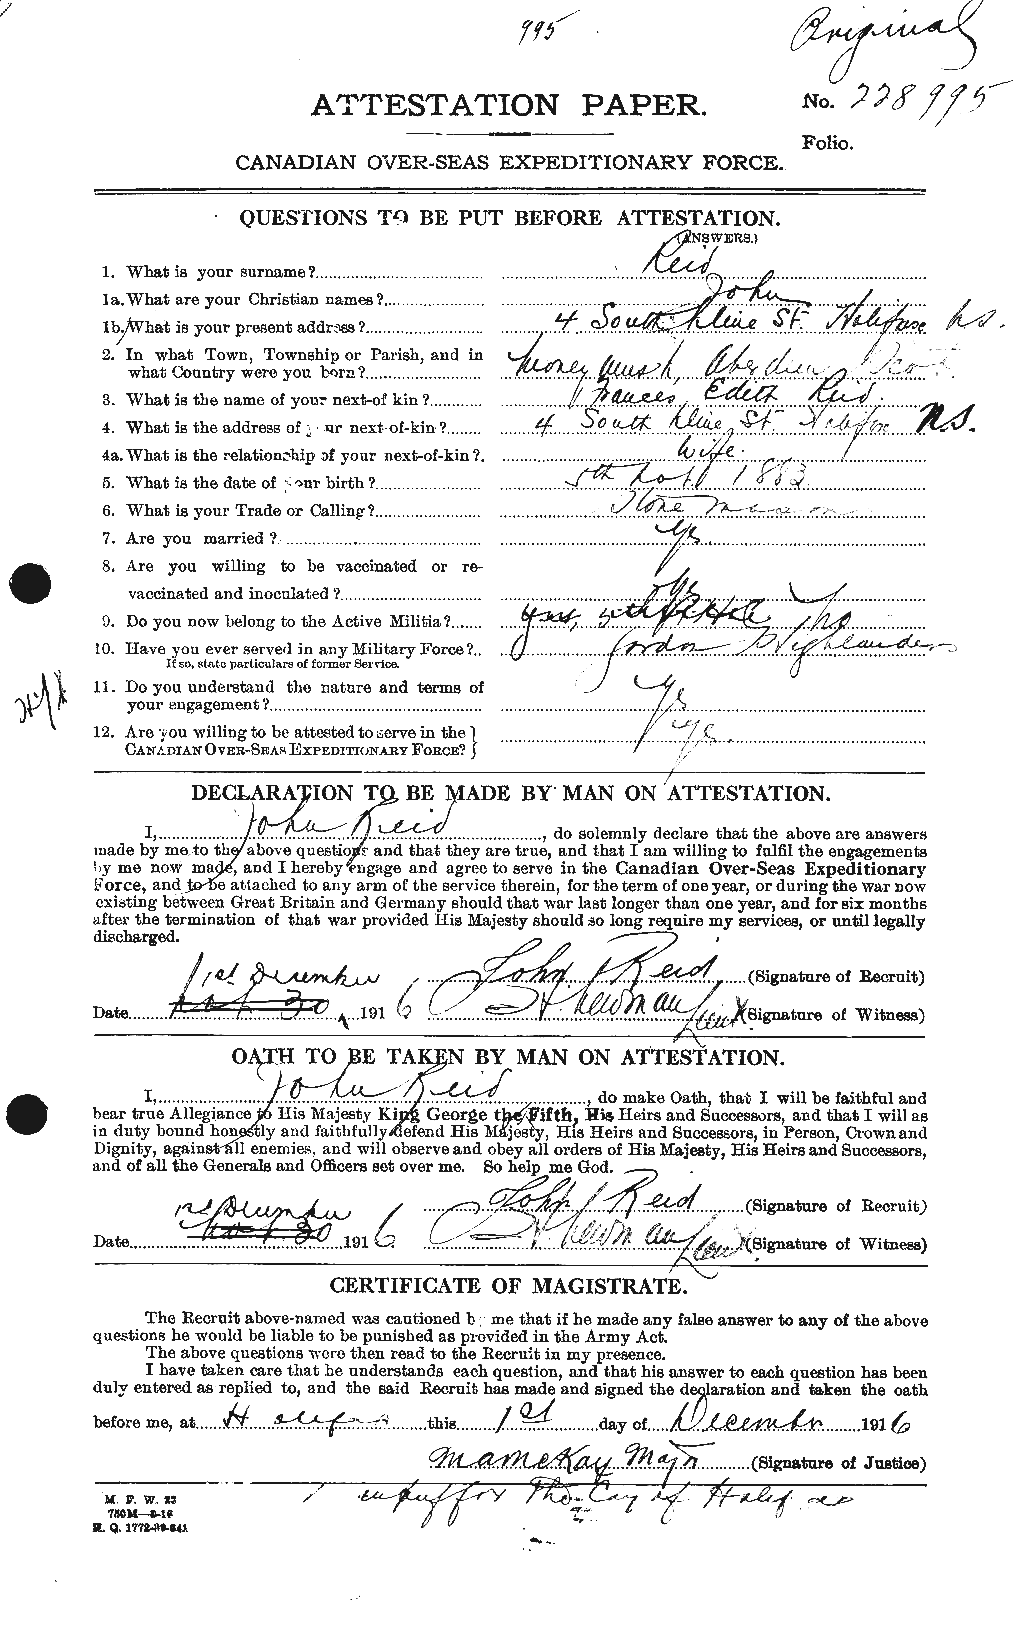 Personnel Records of the First World War - CEF 598782a